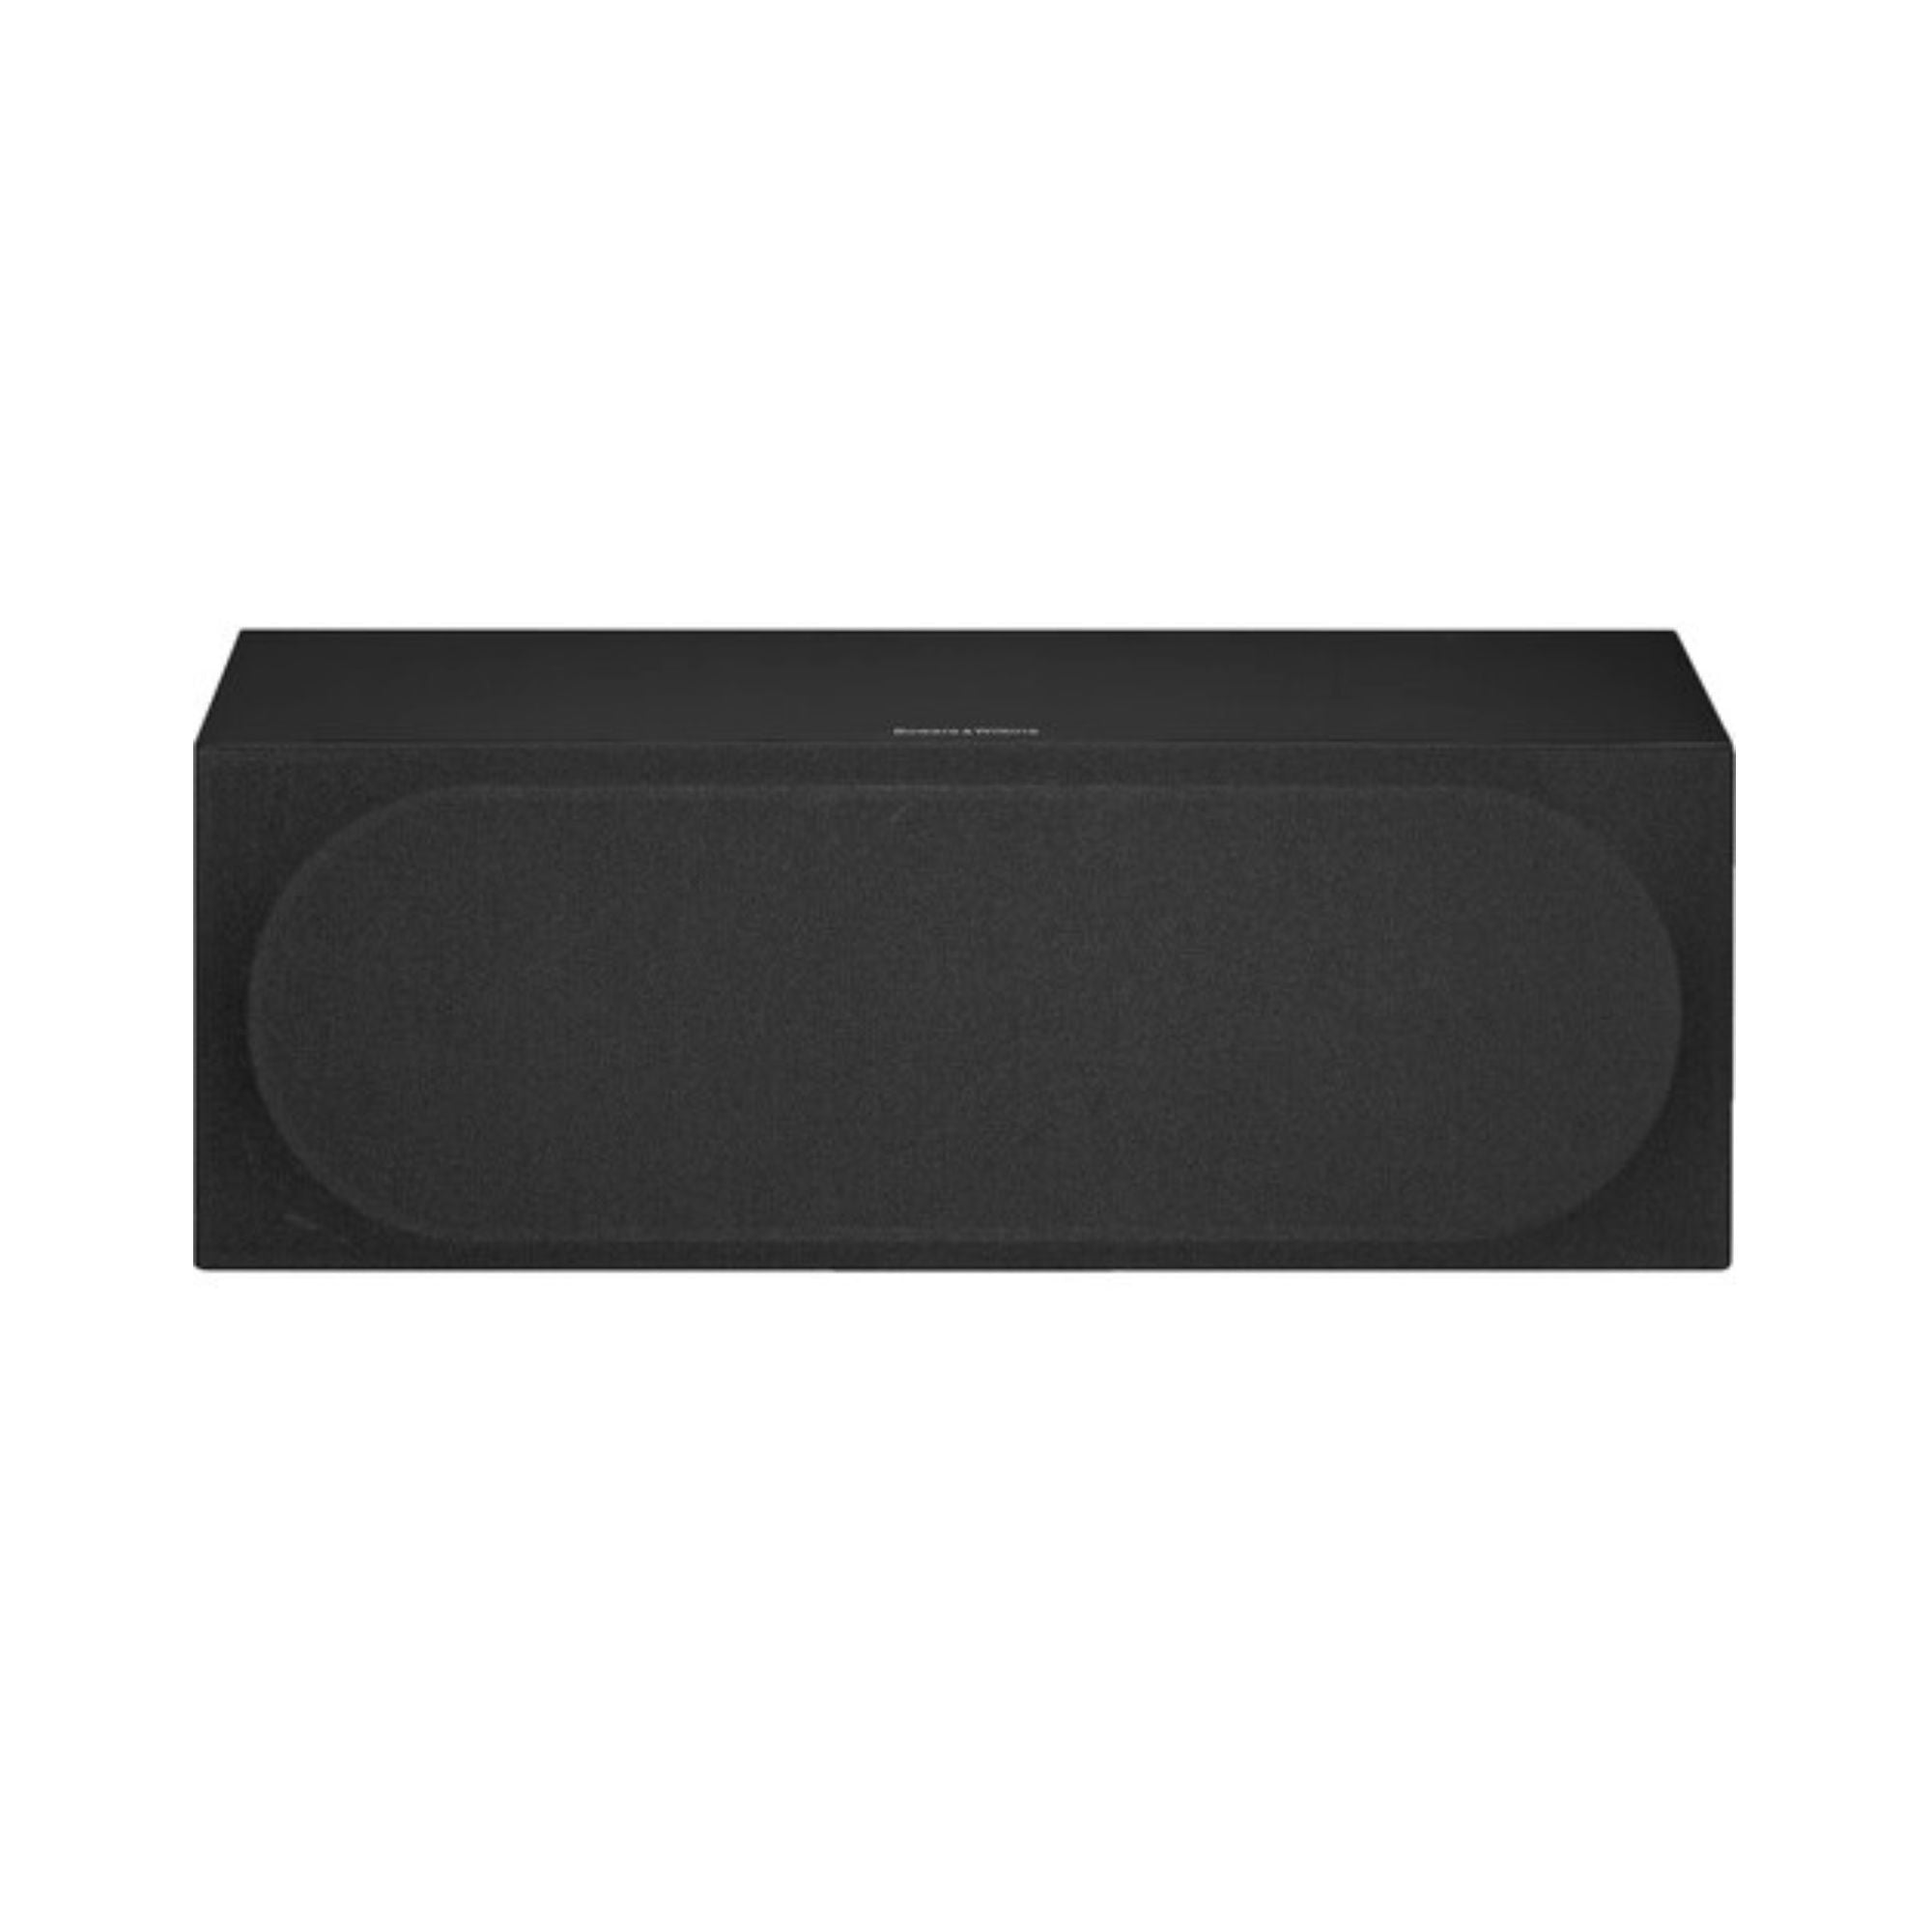 Bowers & Wilkins HTM72 S3 - 2-Way Center Channel Speaker, Bowers & Wilkins, Centre Channel Speaker - AVStore.in